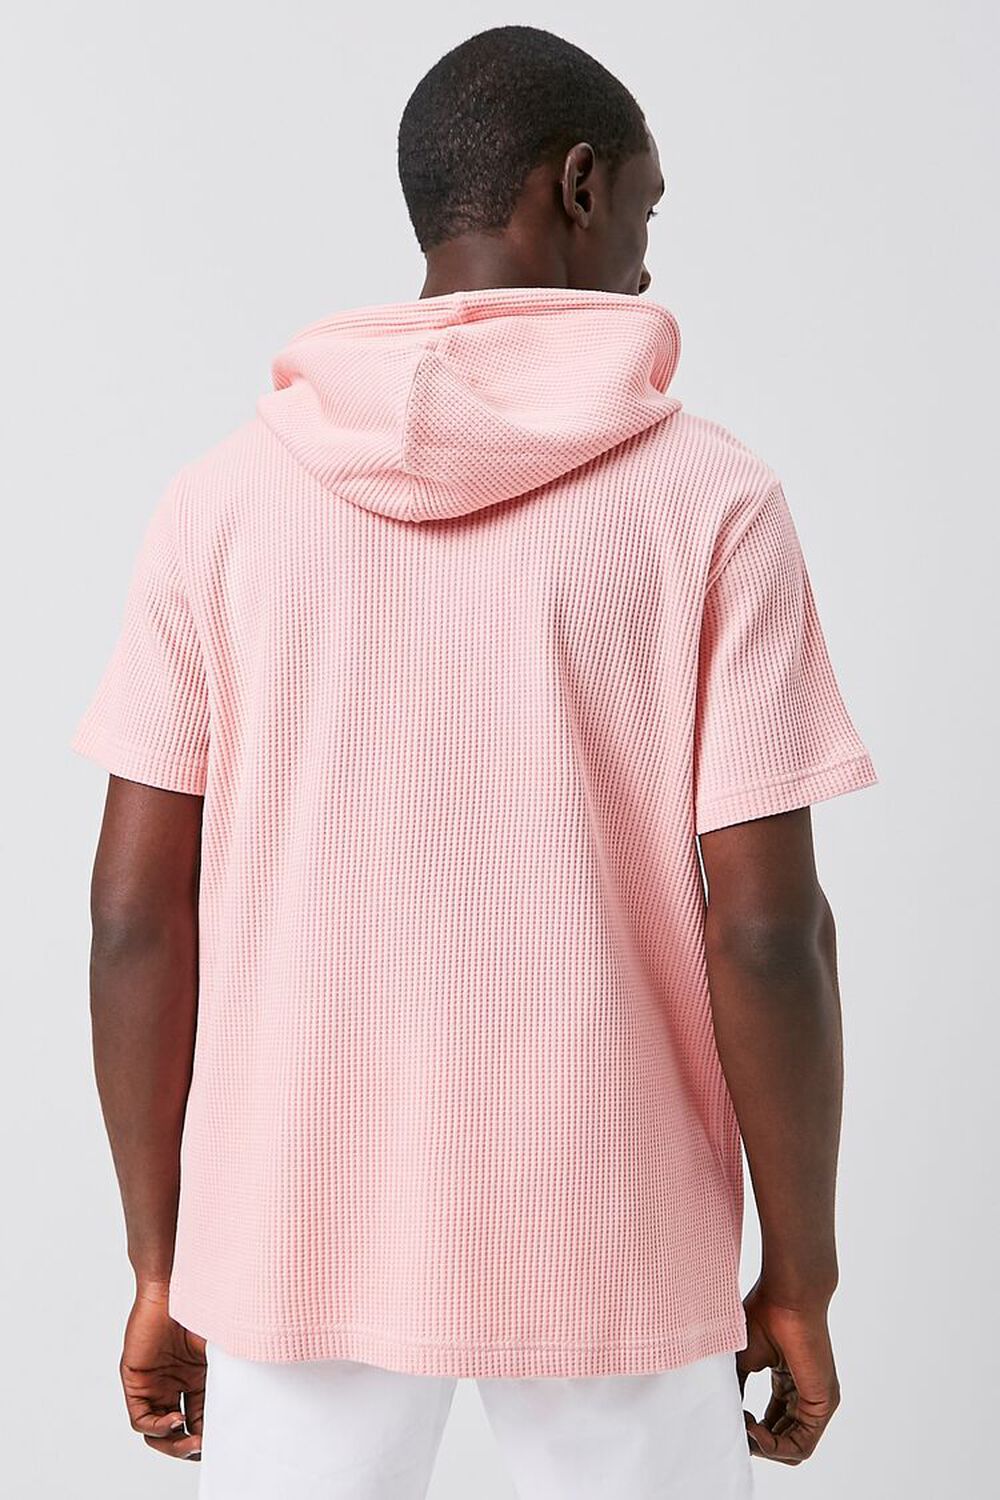 PINK Ribbed Knit Hooded Top, image 3